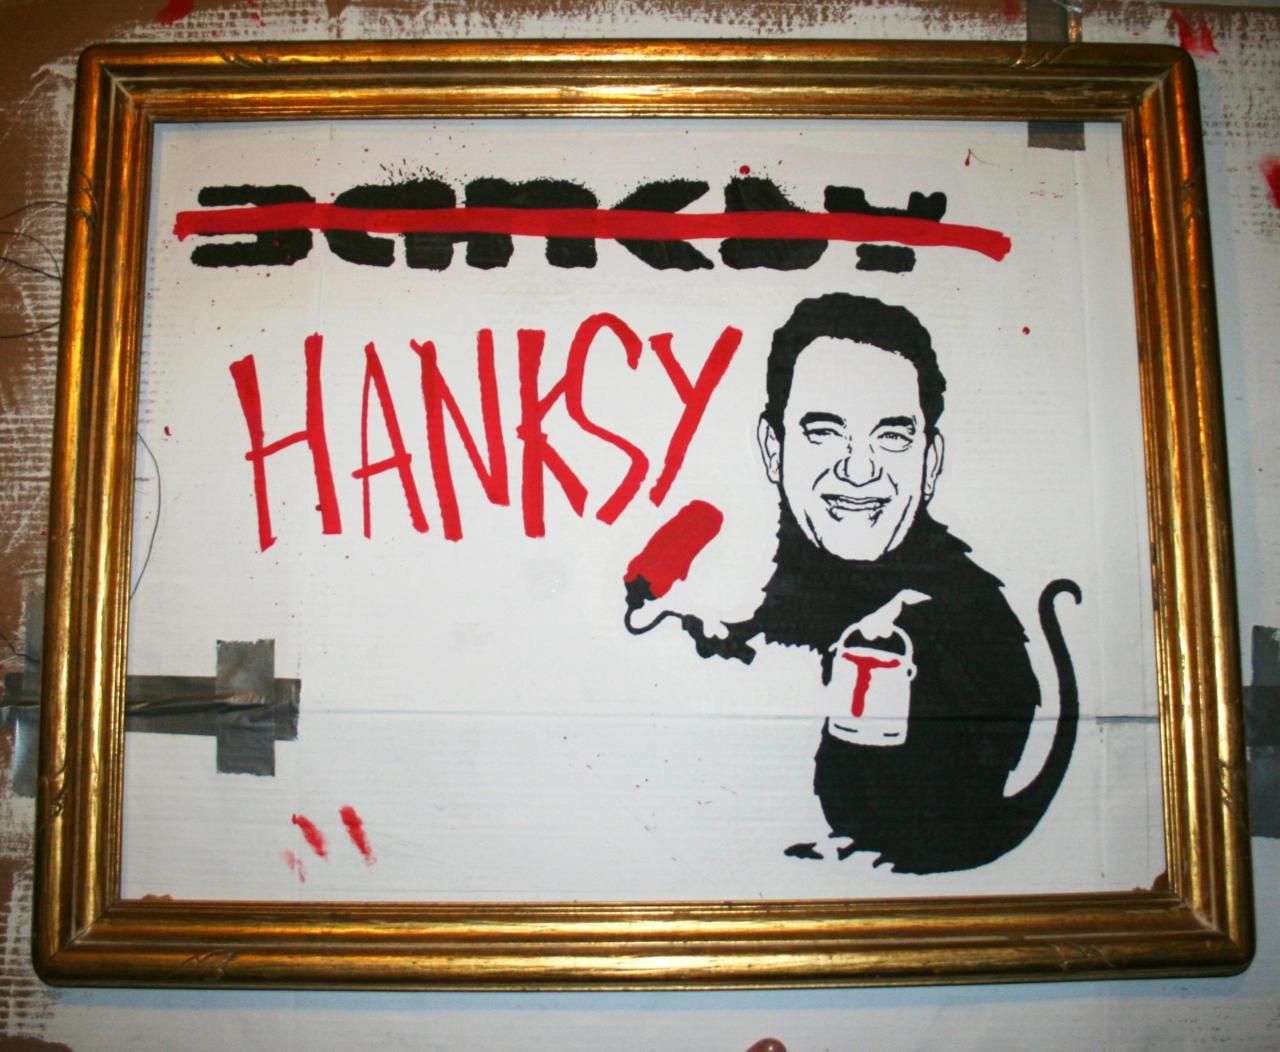 The Best Quotes from the New York Times’ Profile of Hansky, the Bansky Parodist